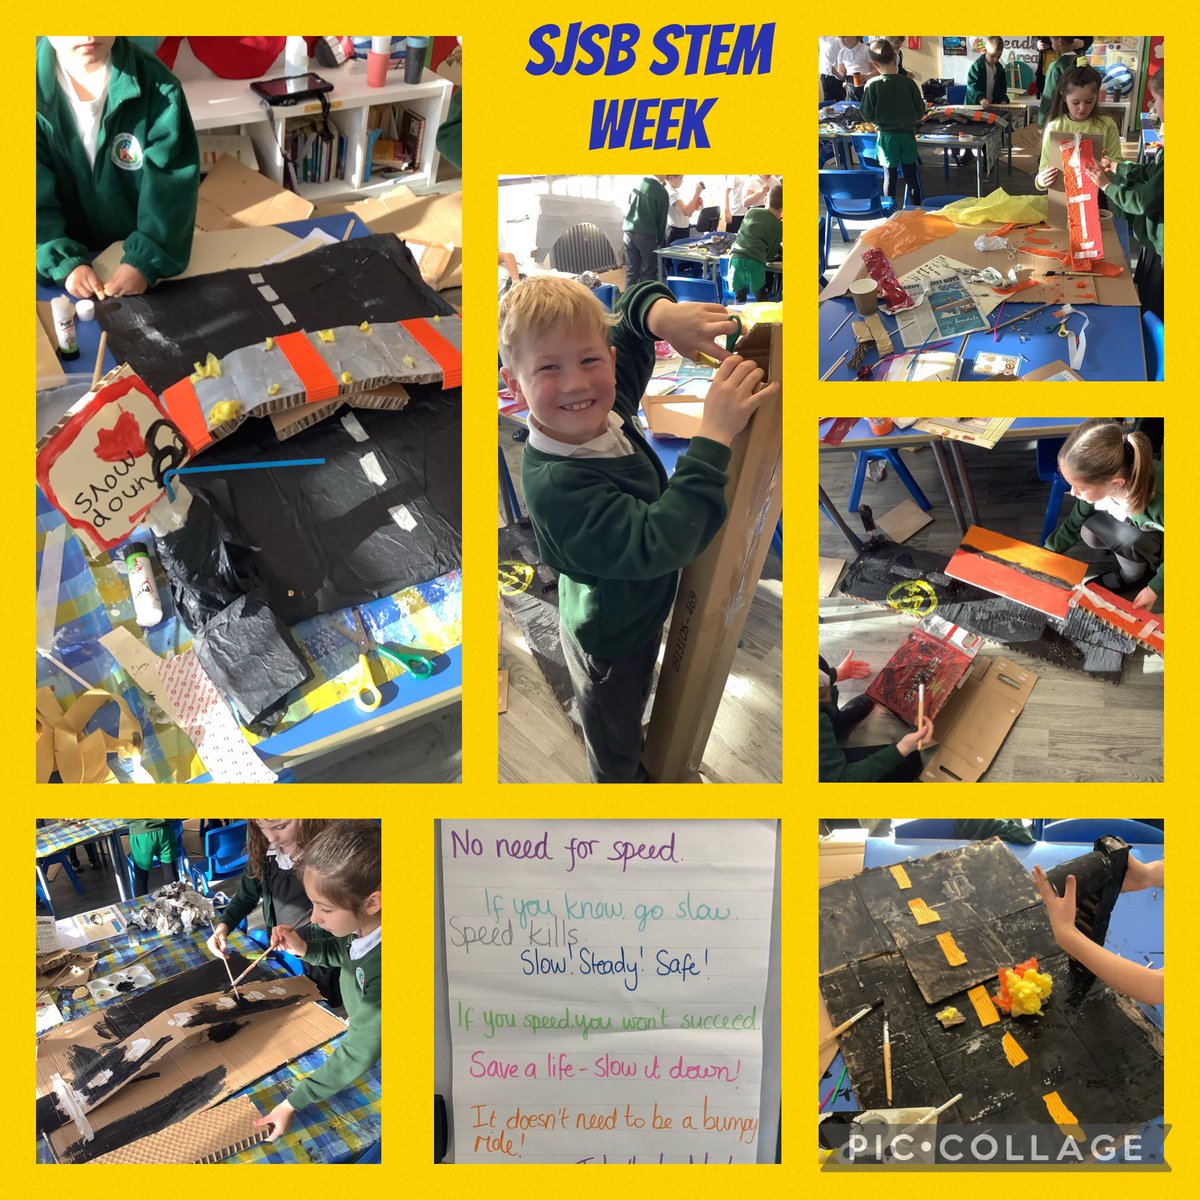 Are all speed bumps effective? During STEM week, Class 6 have been hard at work redesigning and building speed bumps that ensure maximum road safety. They have also come up with some catchy slogans to remind drivers how to keep our community safe! #sjsbstem #sjsbdt